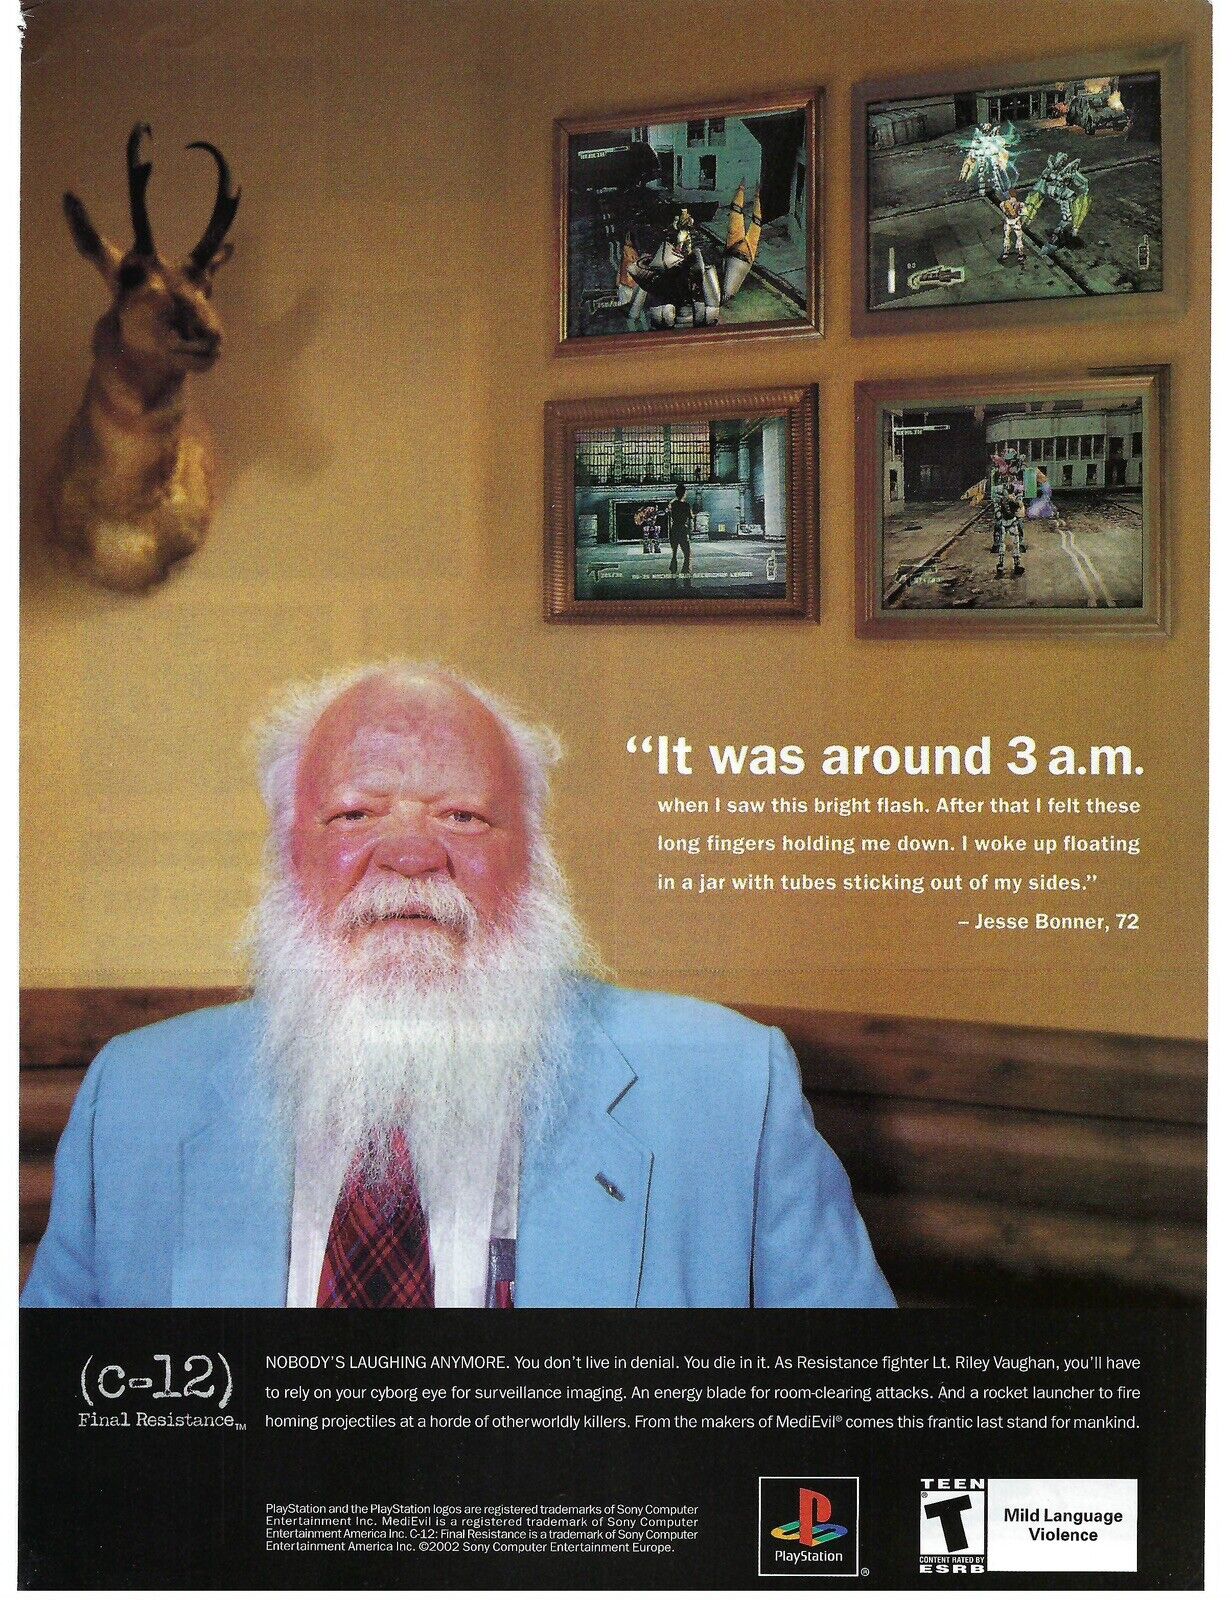 2002 C-12 Final Resistance Video Game Was Around 3 a.m. Vintage Print Ad/Poster